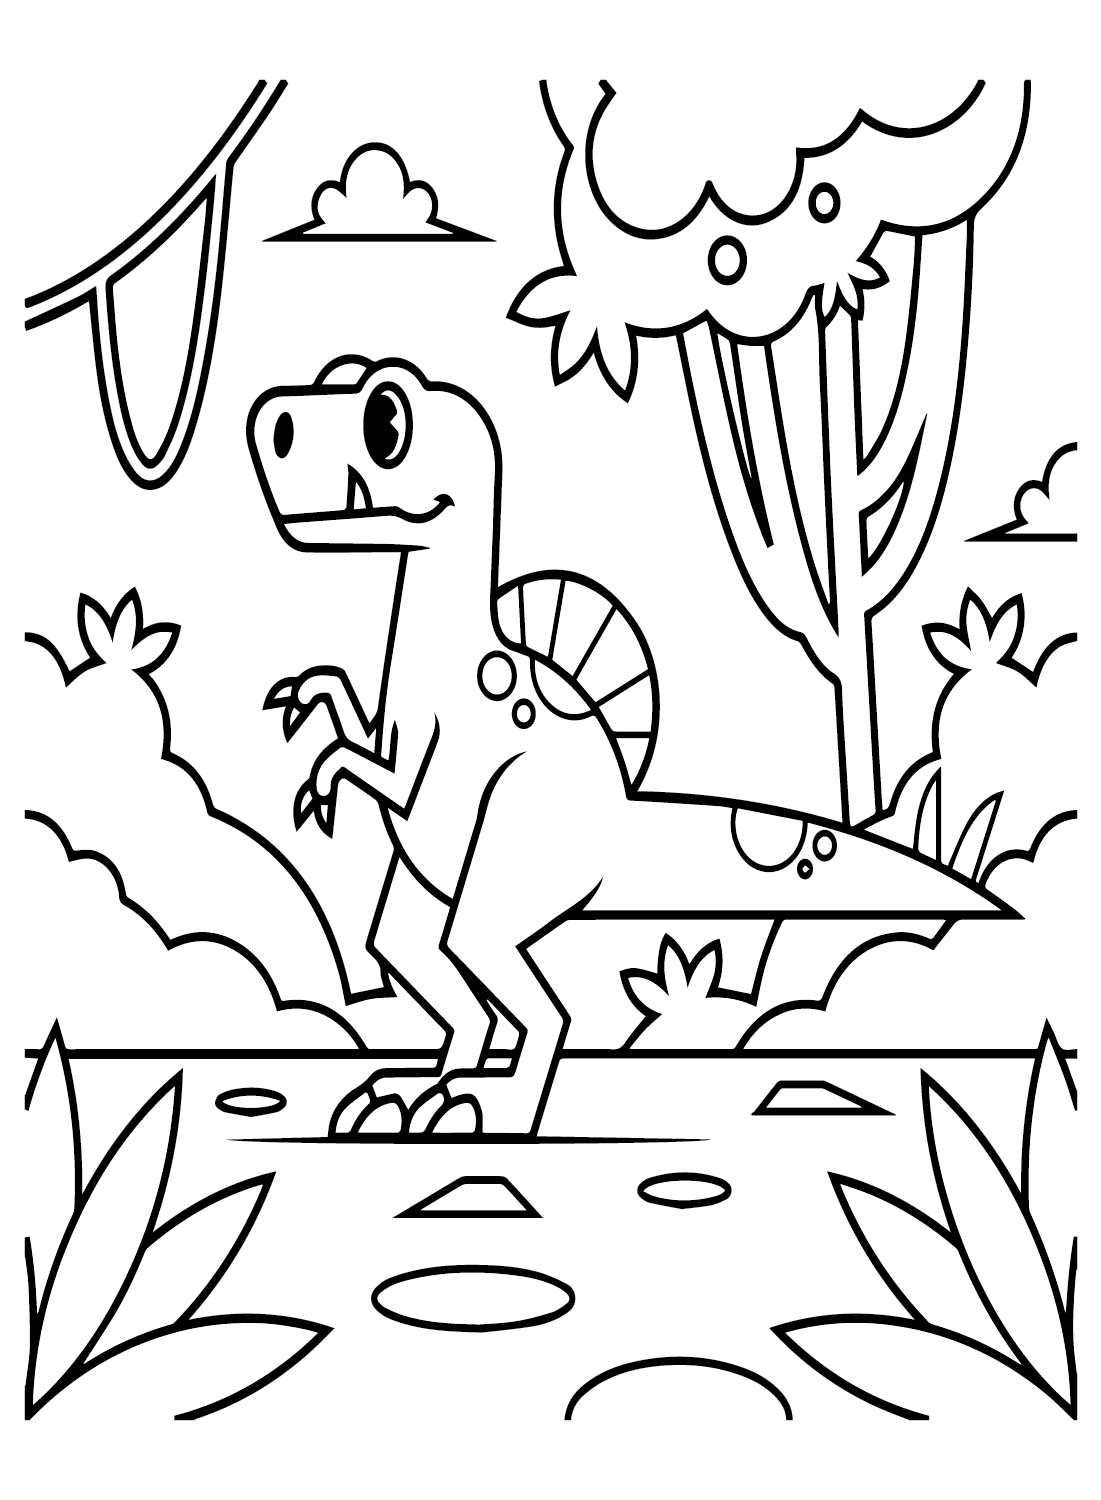 Spinosaurus Aegyptiacus Coloring Page PDF from Spinosaurus Aegyptiacus